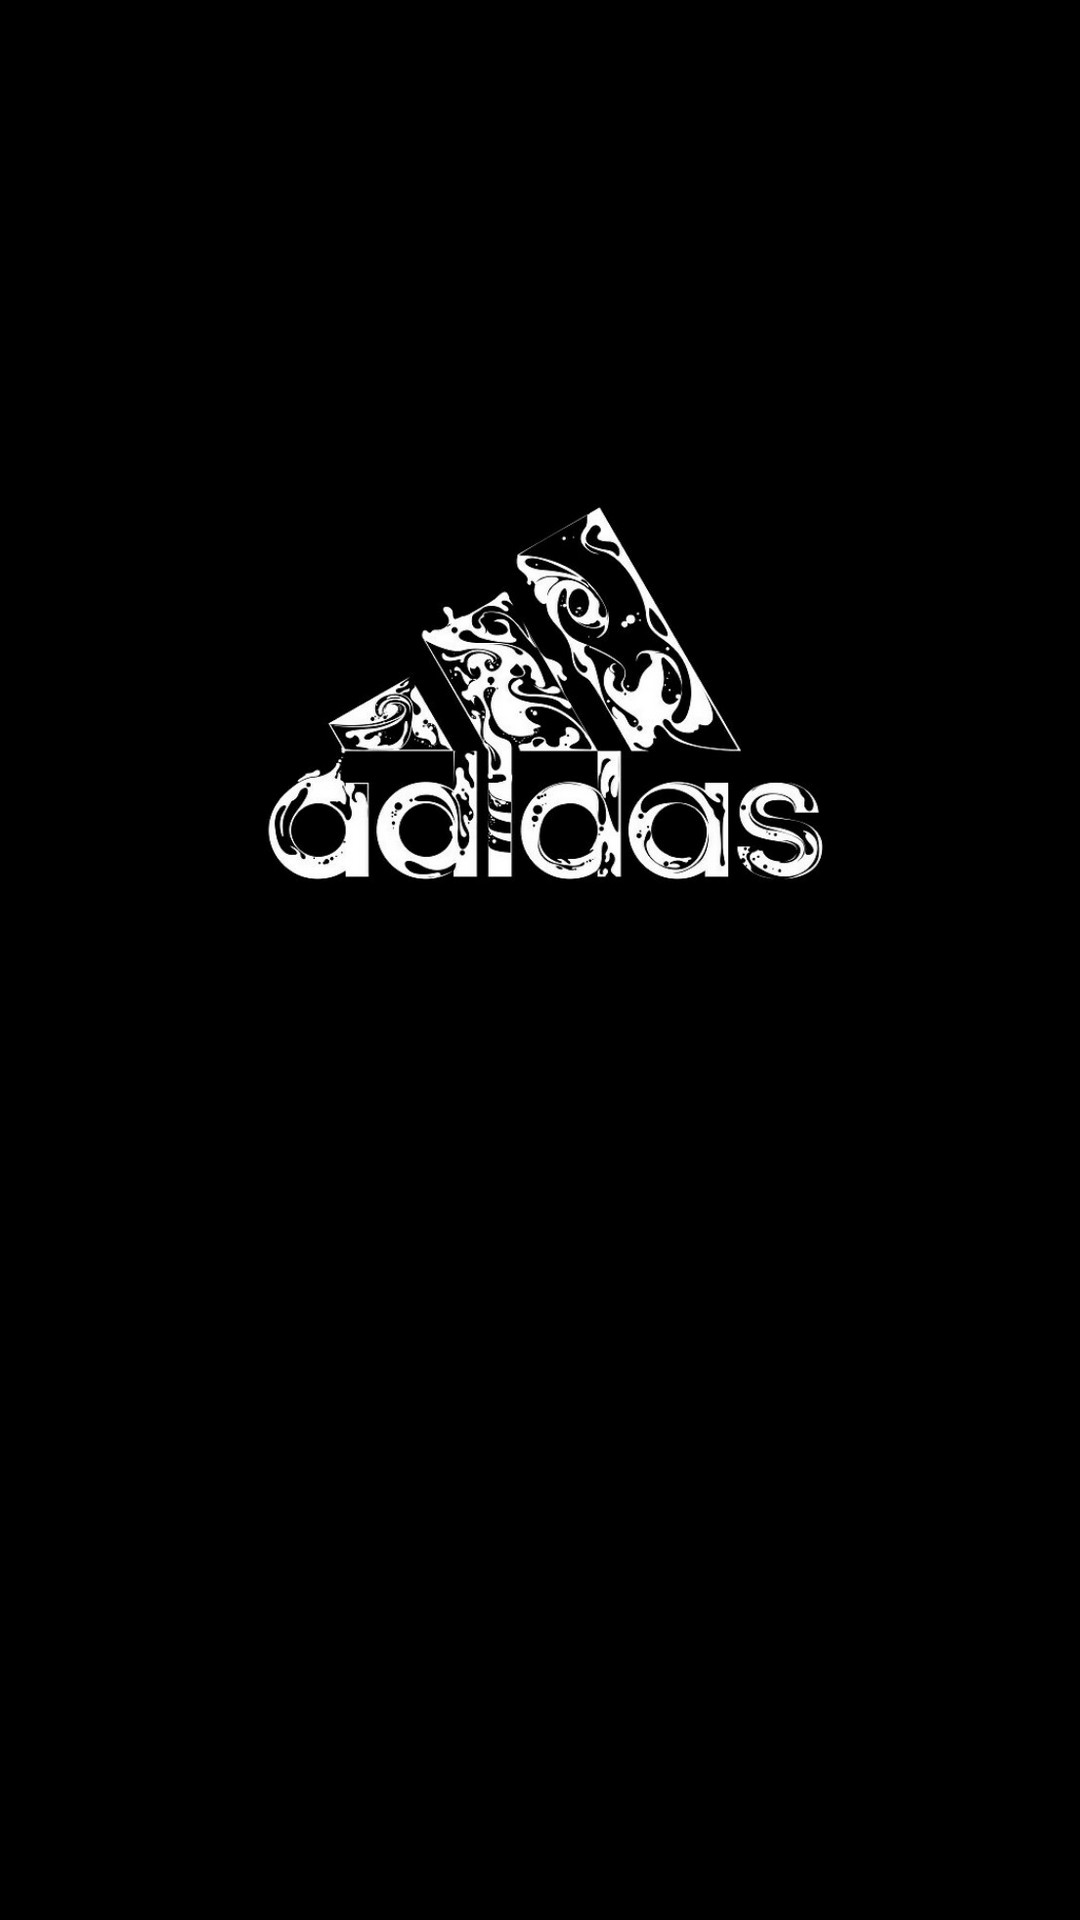 Adidas Android Wallpaper With high-resolution 1080X1920 pixel. You can use this wallpaper for your Android backgrounds, Tablet, Samsung Screensavers, Mobile Phone Lock Screen and another Smartphones device